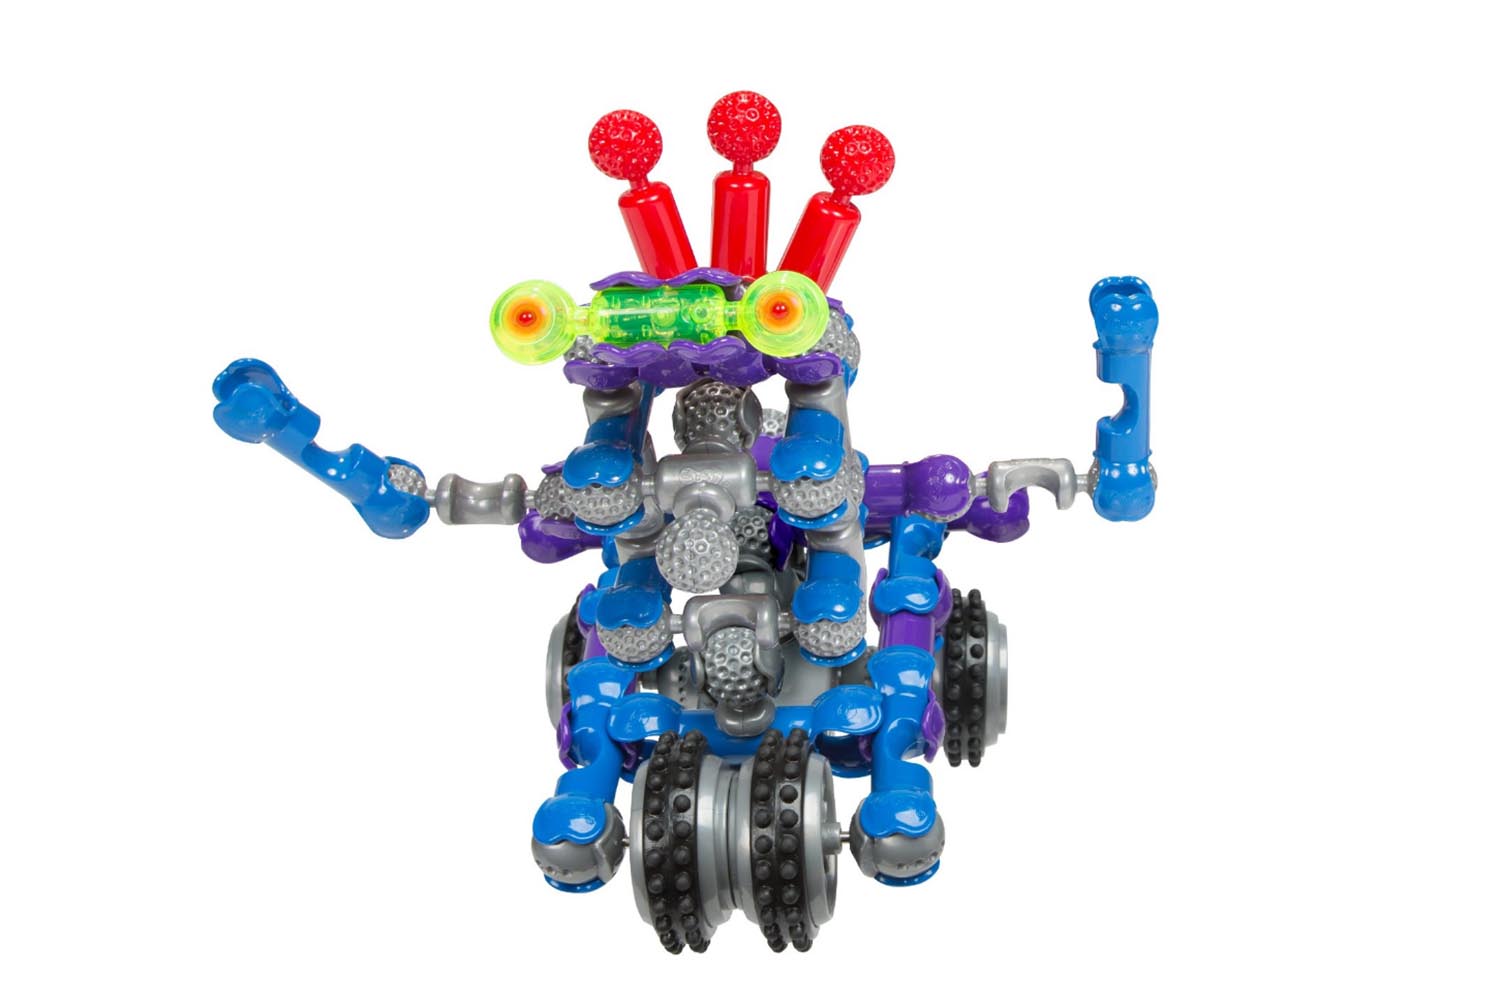 1. Kids can build their very own robot with the ZOOB Bot Kit Clapway